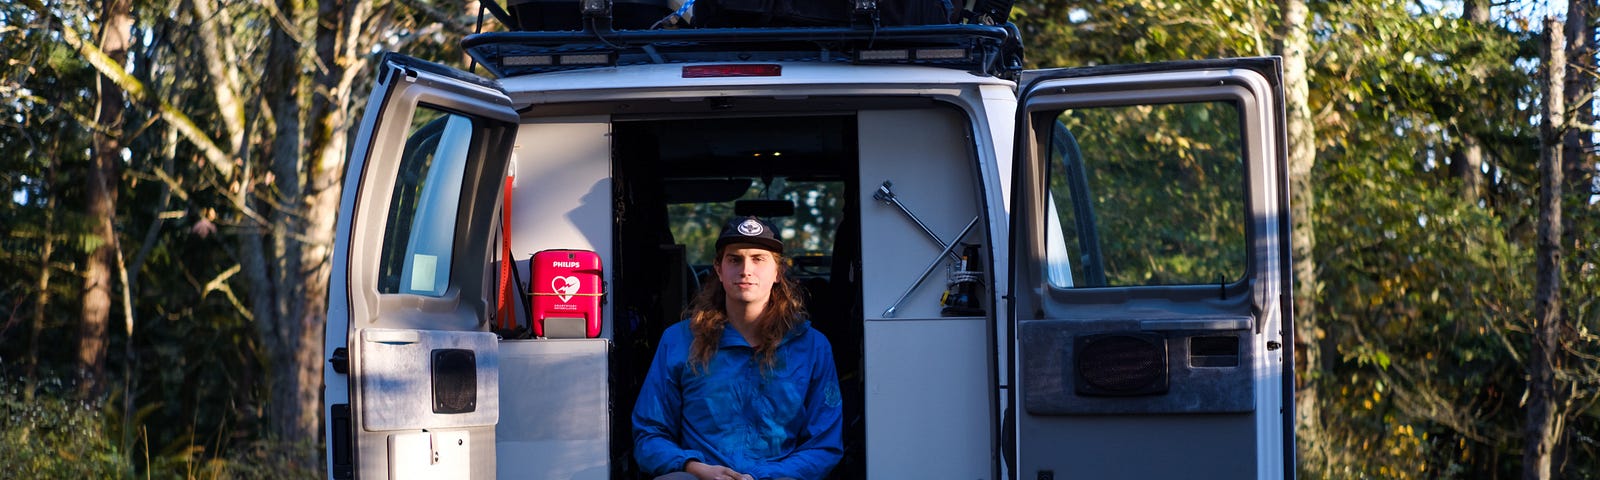 Thomas Meade sits in the back of a white search and rescue van in a parking lot.